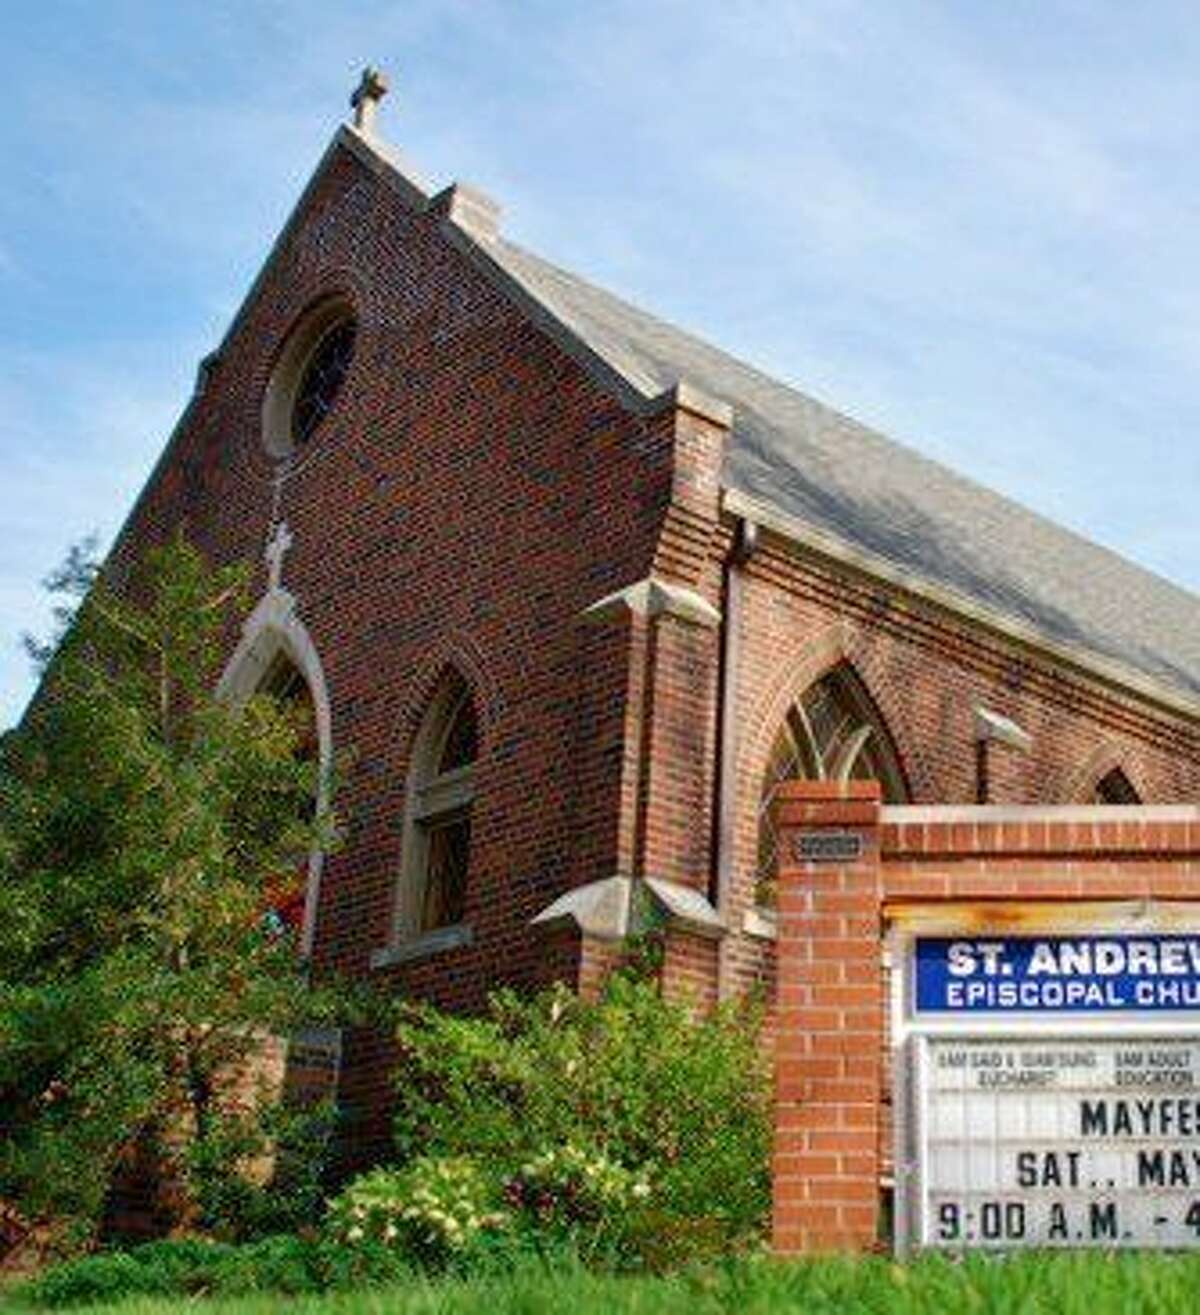 St. Andrew’s Episcopal Church at 406 Hillsboro Ave. in Edwardsville will have its Winter Book Fair on Saturday, Feb. 11 from 9 a.m. to noon.